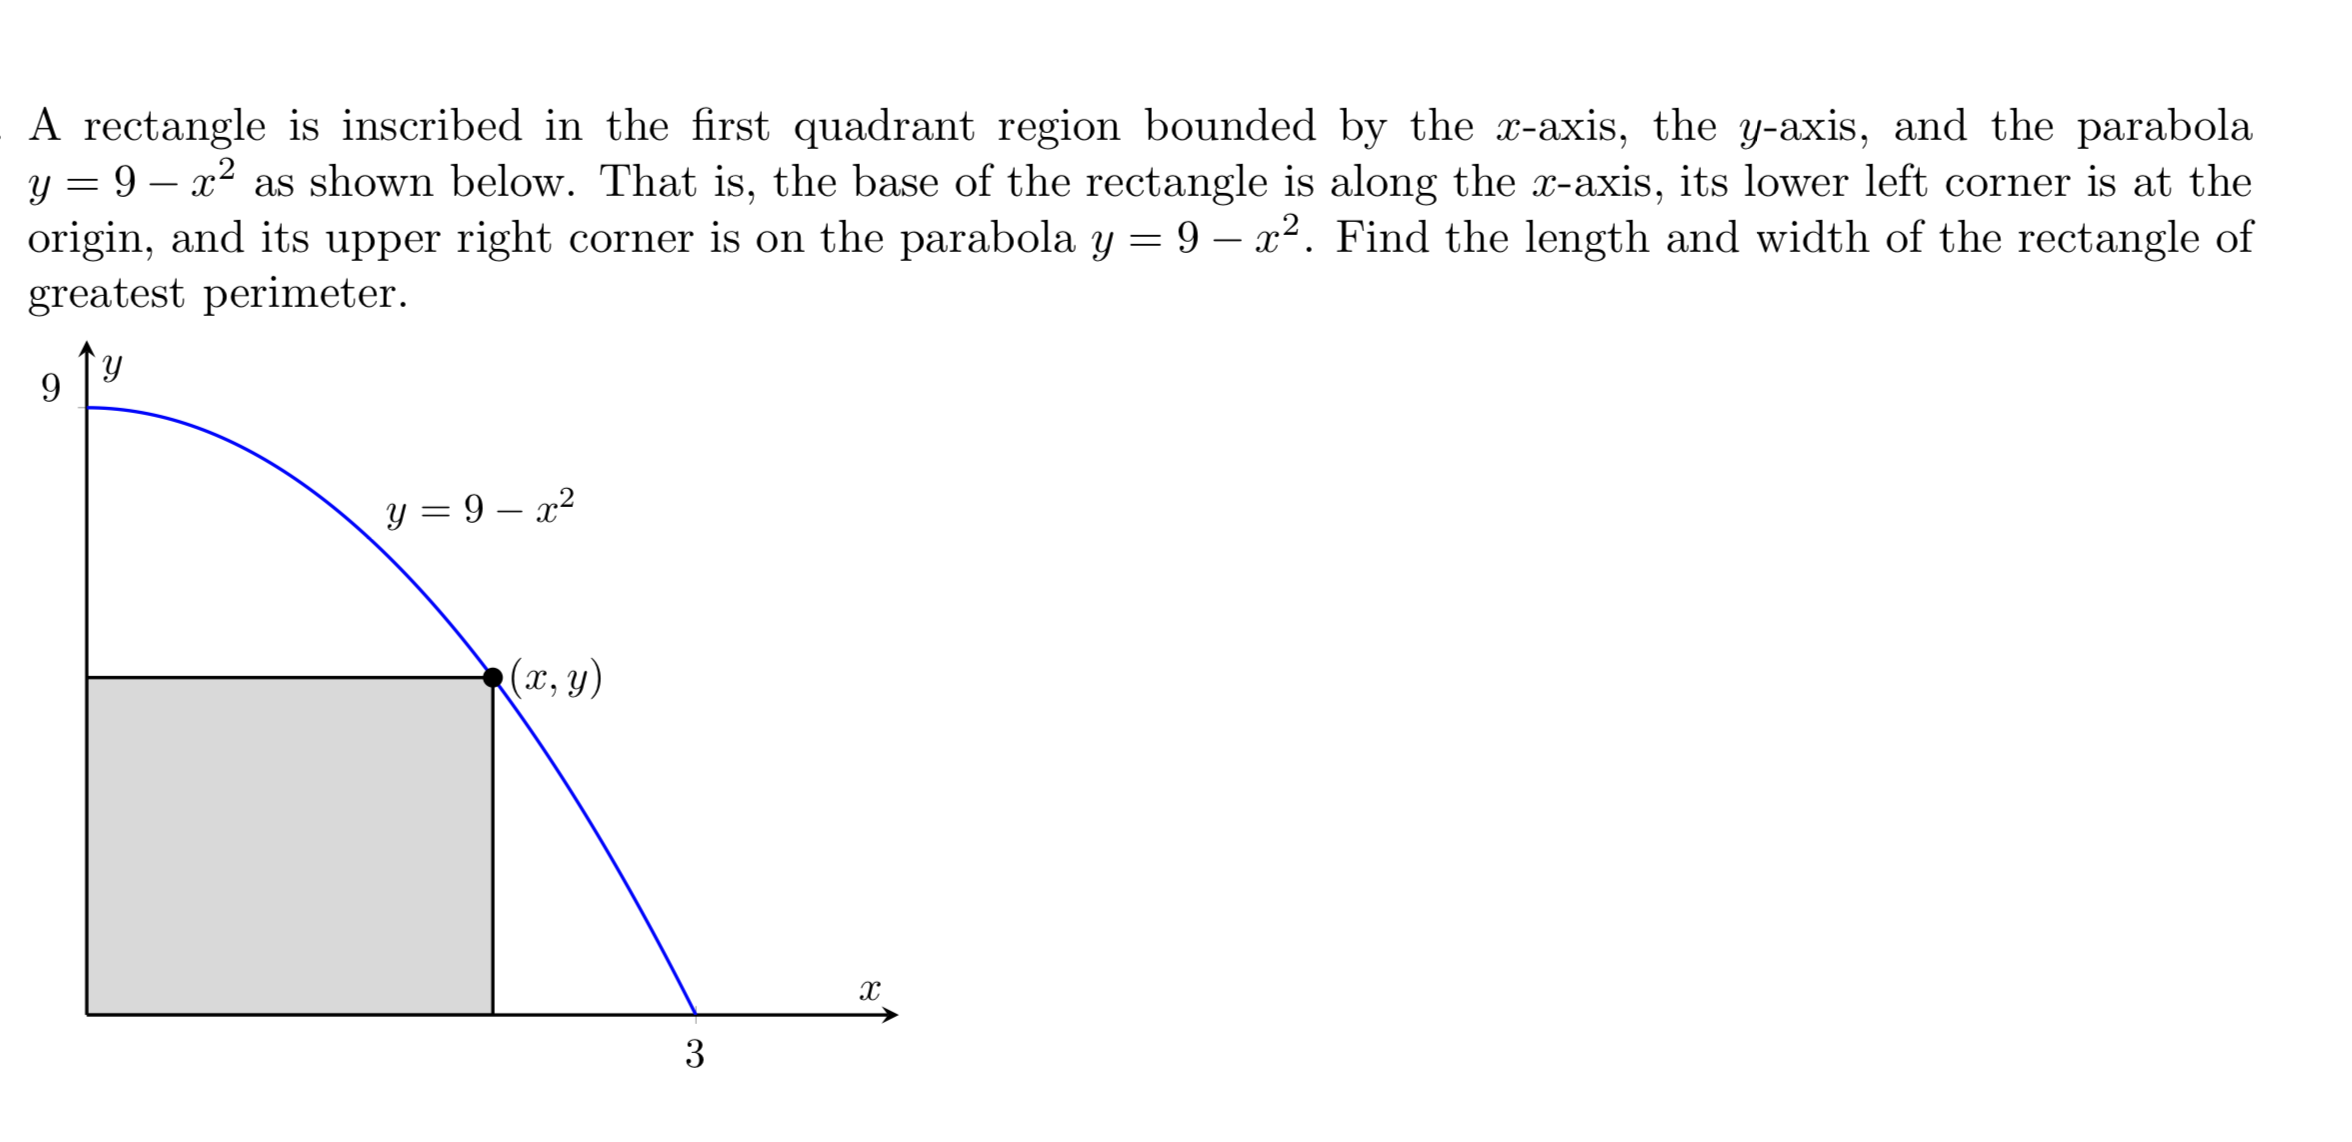 A rectangle is inscribed in the first quadrant region bounded by the r-axis, the y-axis, and the parabola
y9 - as shown below. That is, the base of the rectangle is along the r-axis, its lower left corner is at the
origin, and its upper right corner is on the parabola y 9 - x2. Find the length and width of the rectangle of
greatest perimeter.
y
9
y= 9 x2
(x, y)
